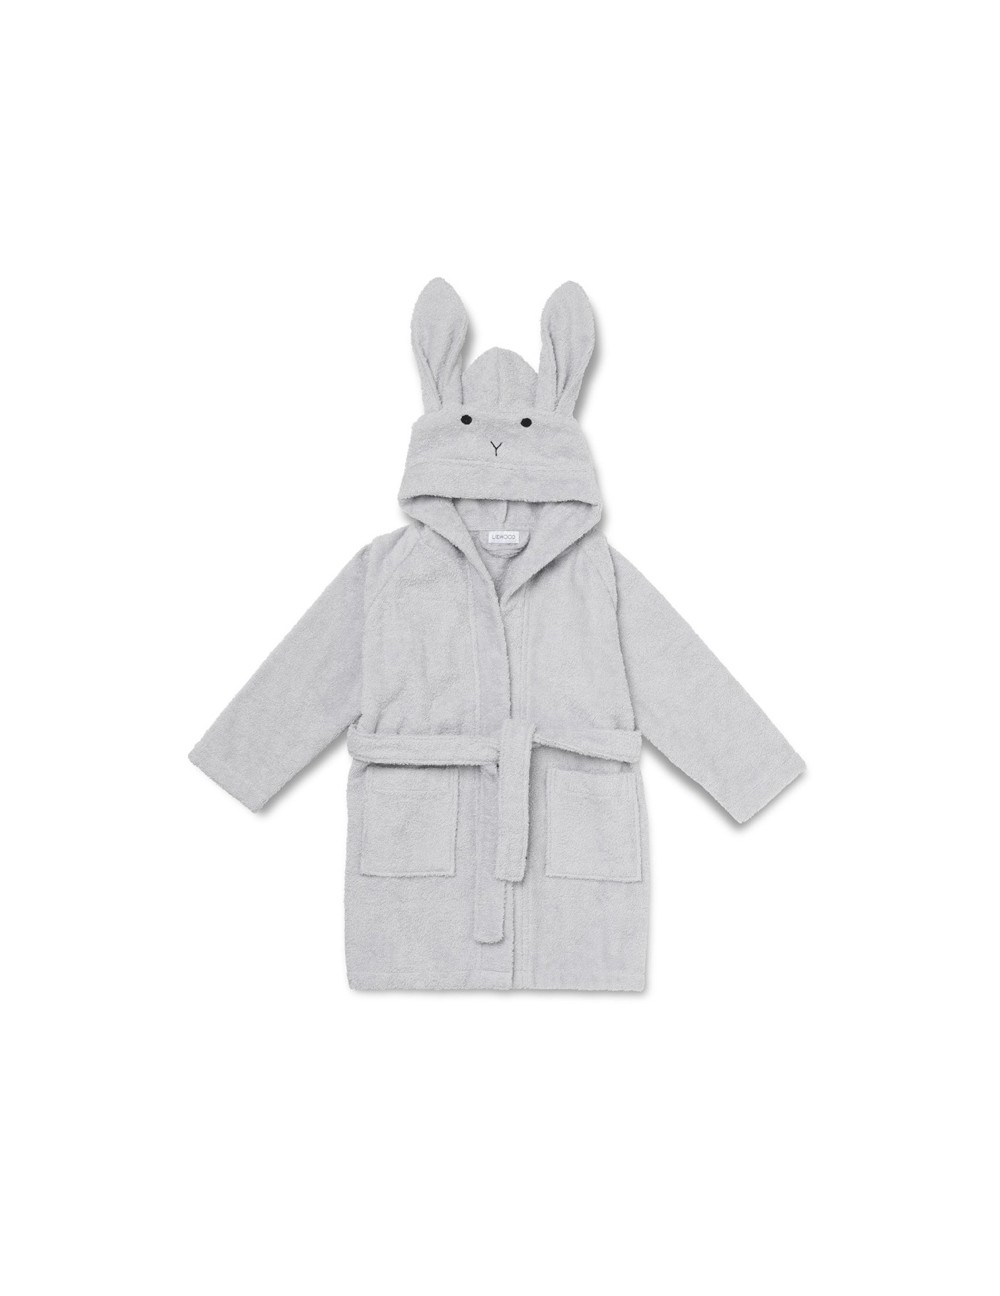 Peignoir Lily - Lapin dumbo gris taille 5-6 ans